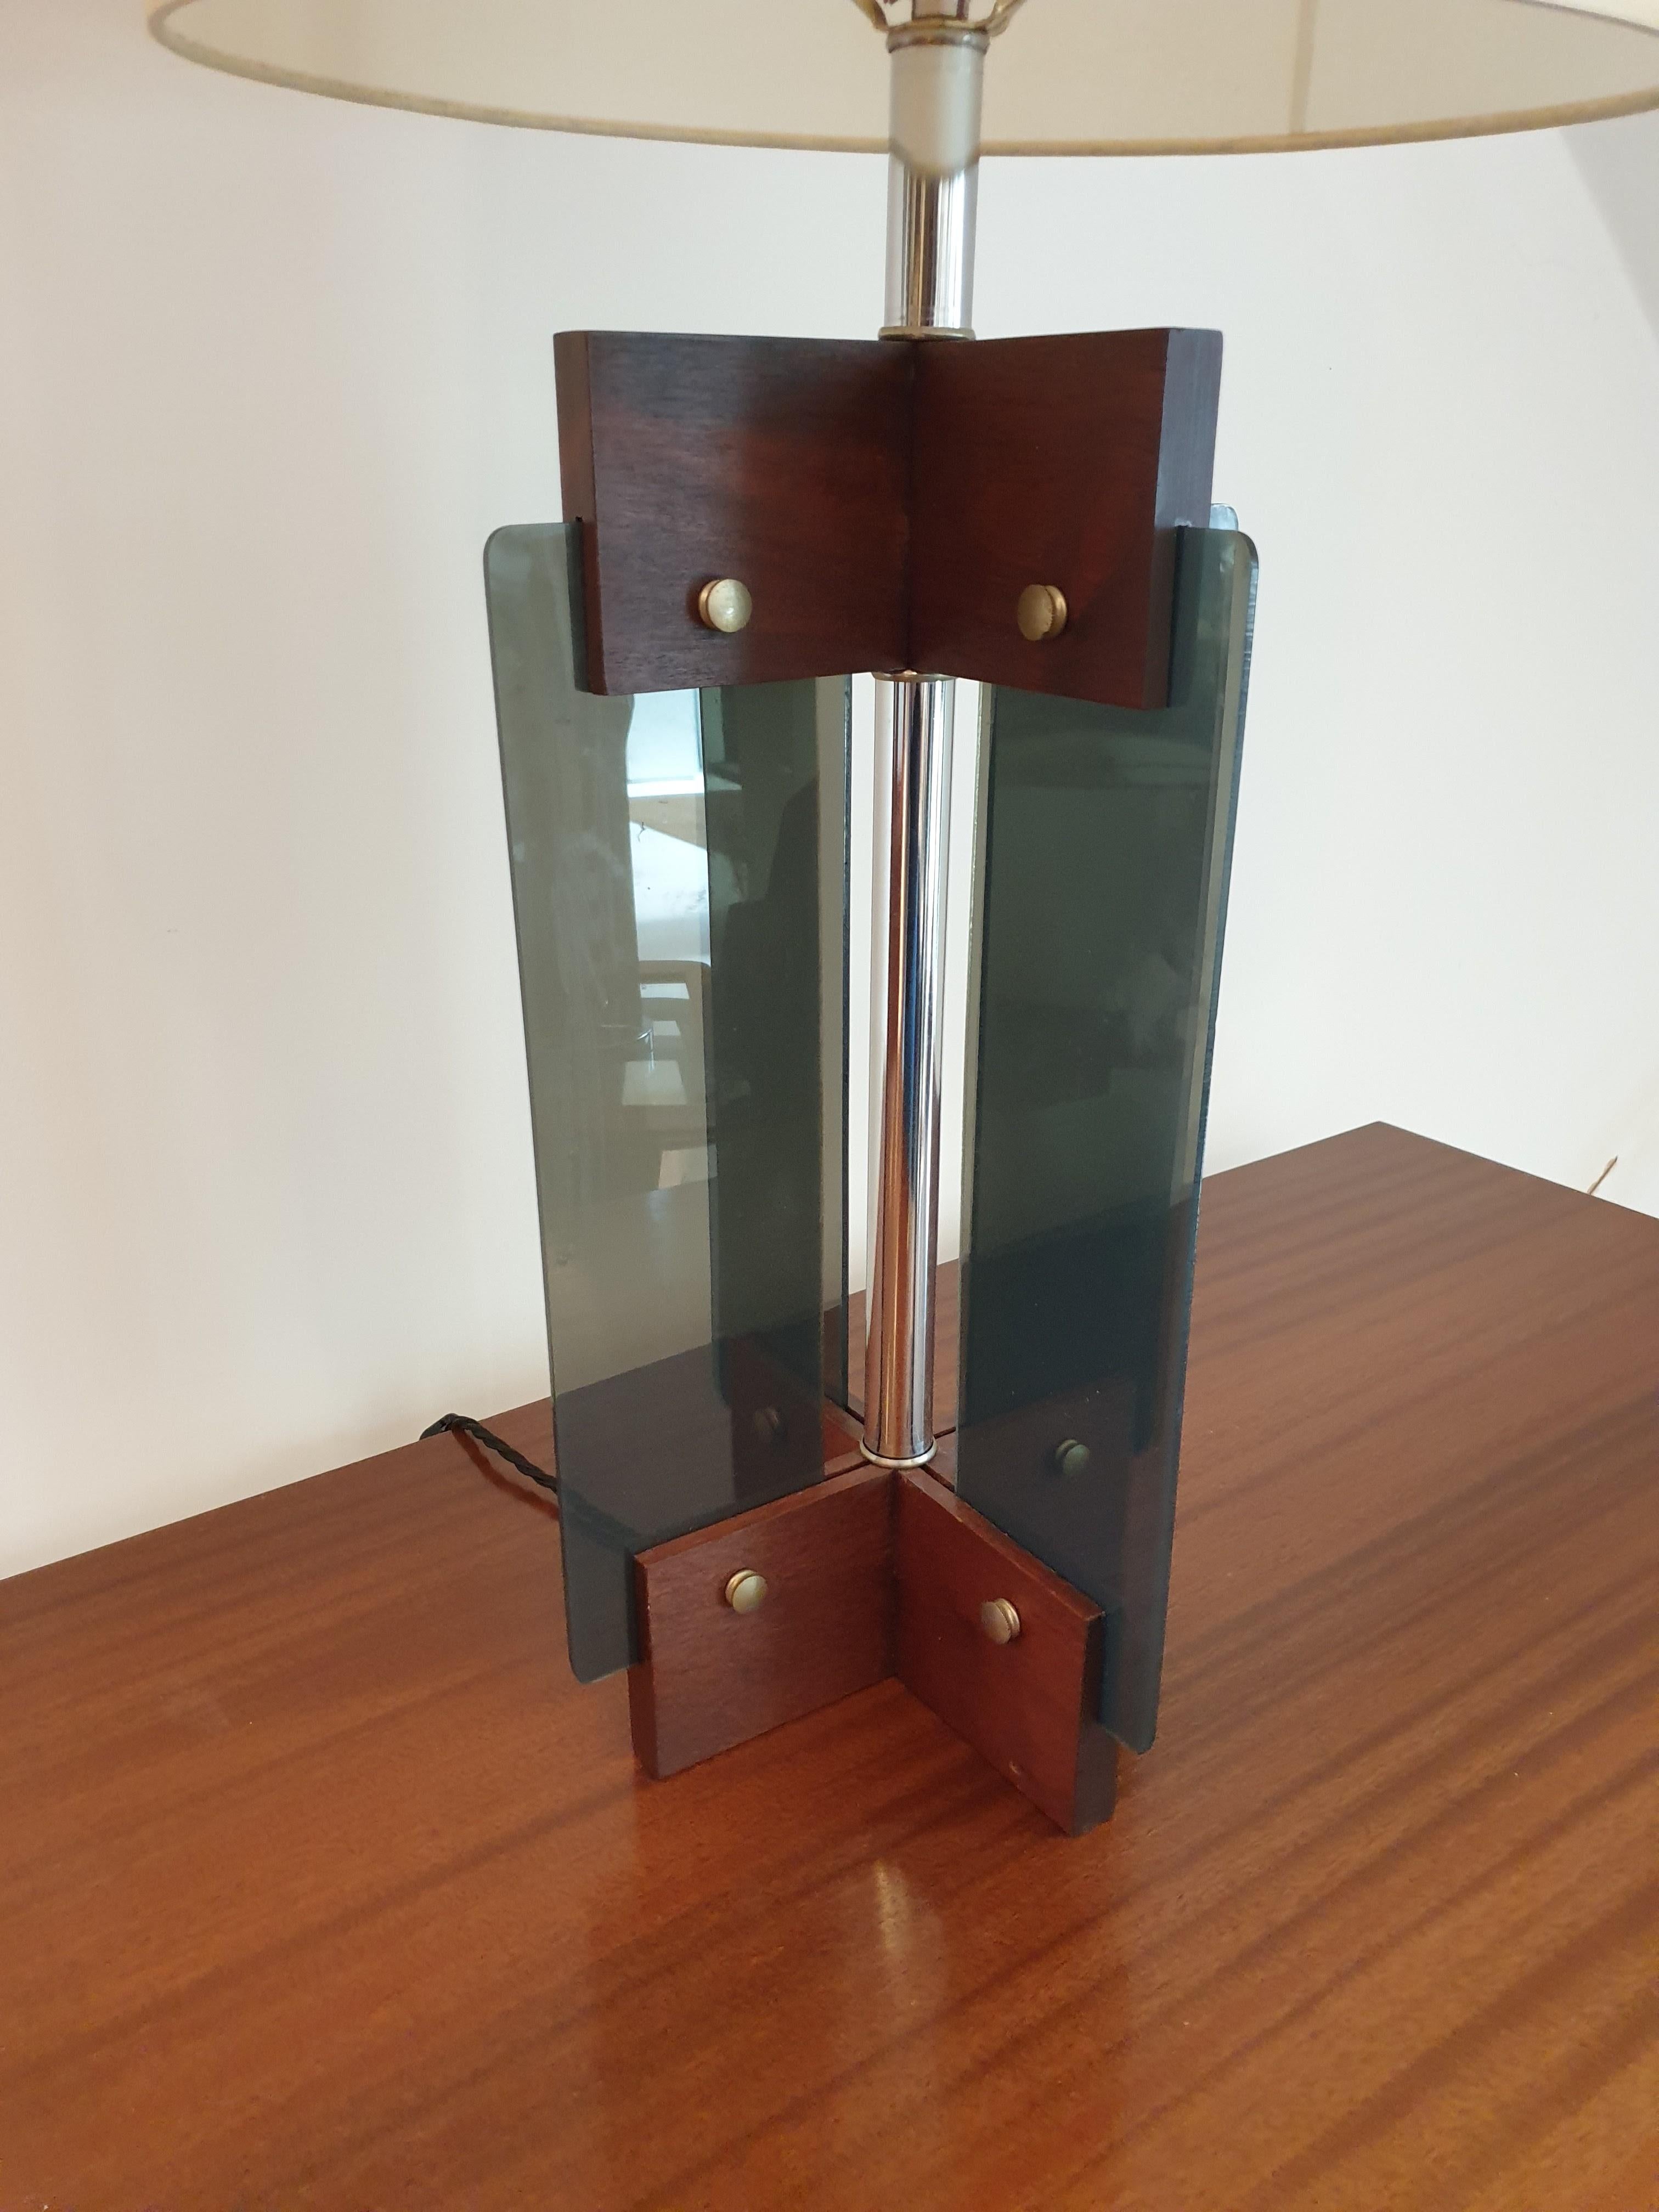 Well sized table lamp with polished wooden base, metal detail and smoked plexiglass glass inserts. Comes complete with bespoke shade.